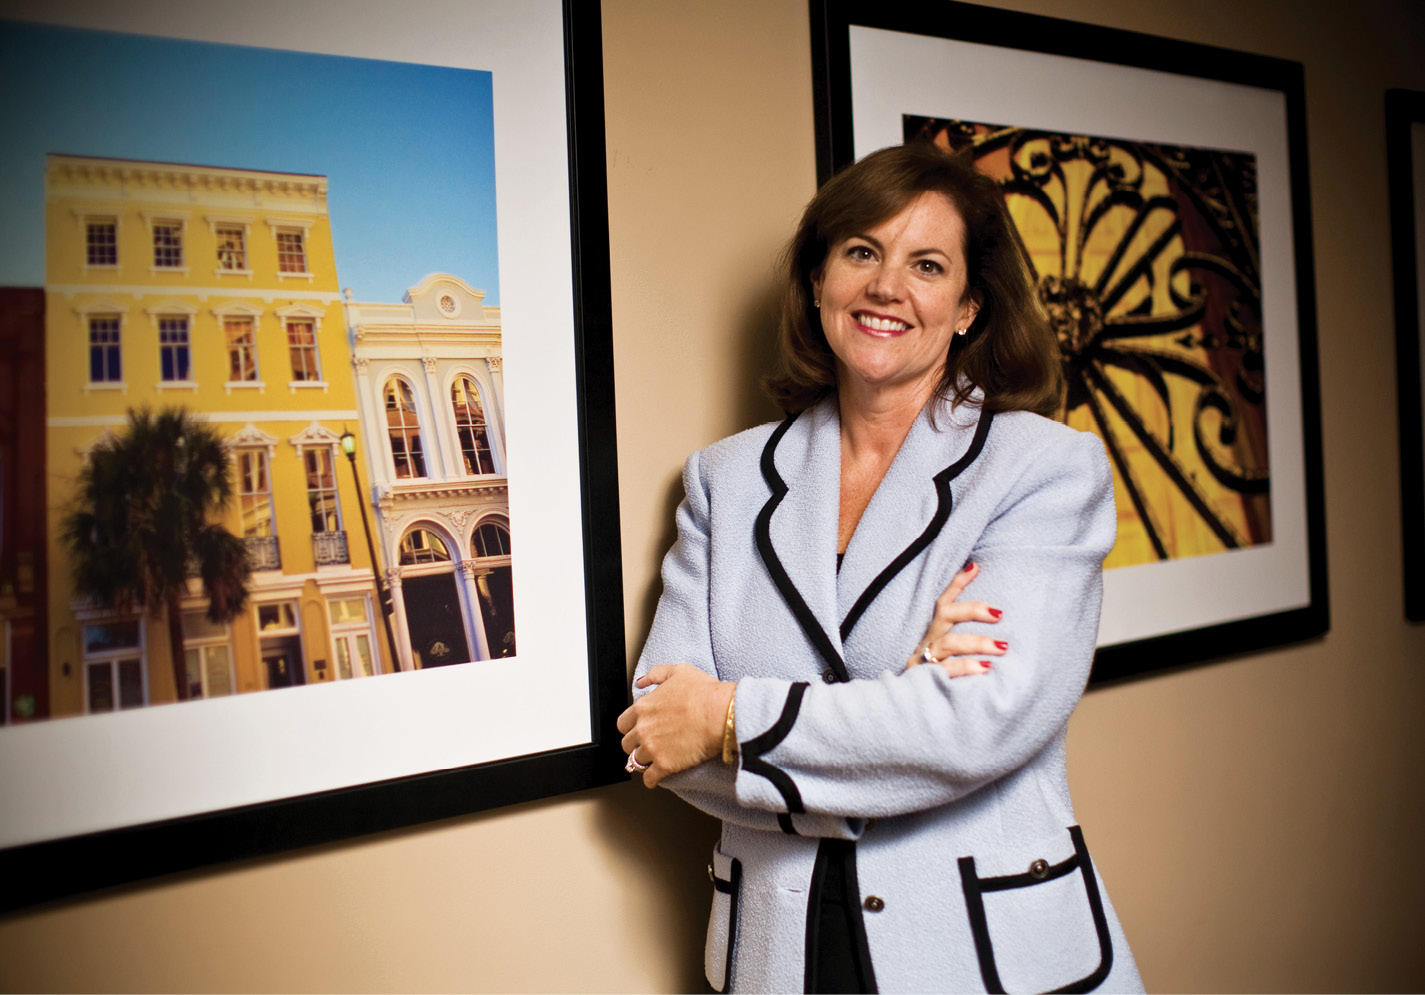 Charleston Area Convention and Visitors Bureau CEO Helen Hill says the key to balancing tourism and livability issues is the right mix of hotel types across municipal lines.